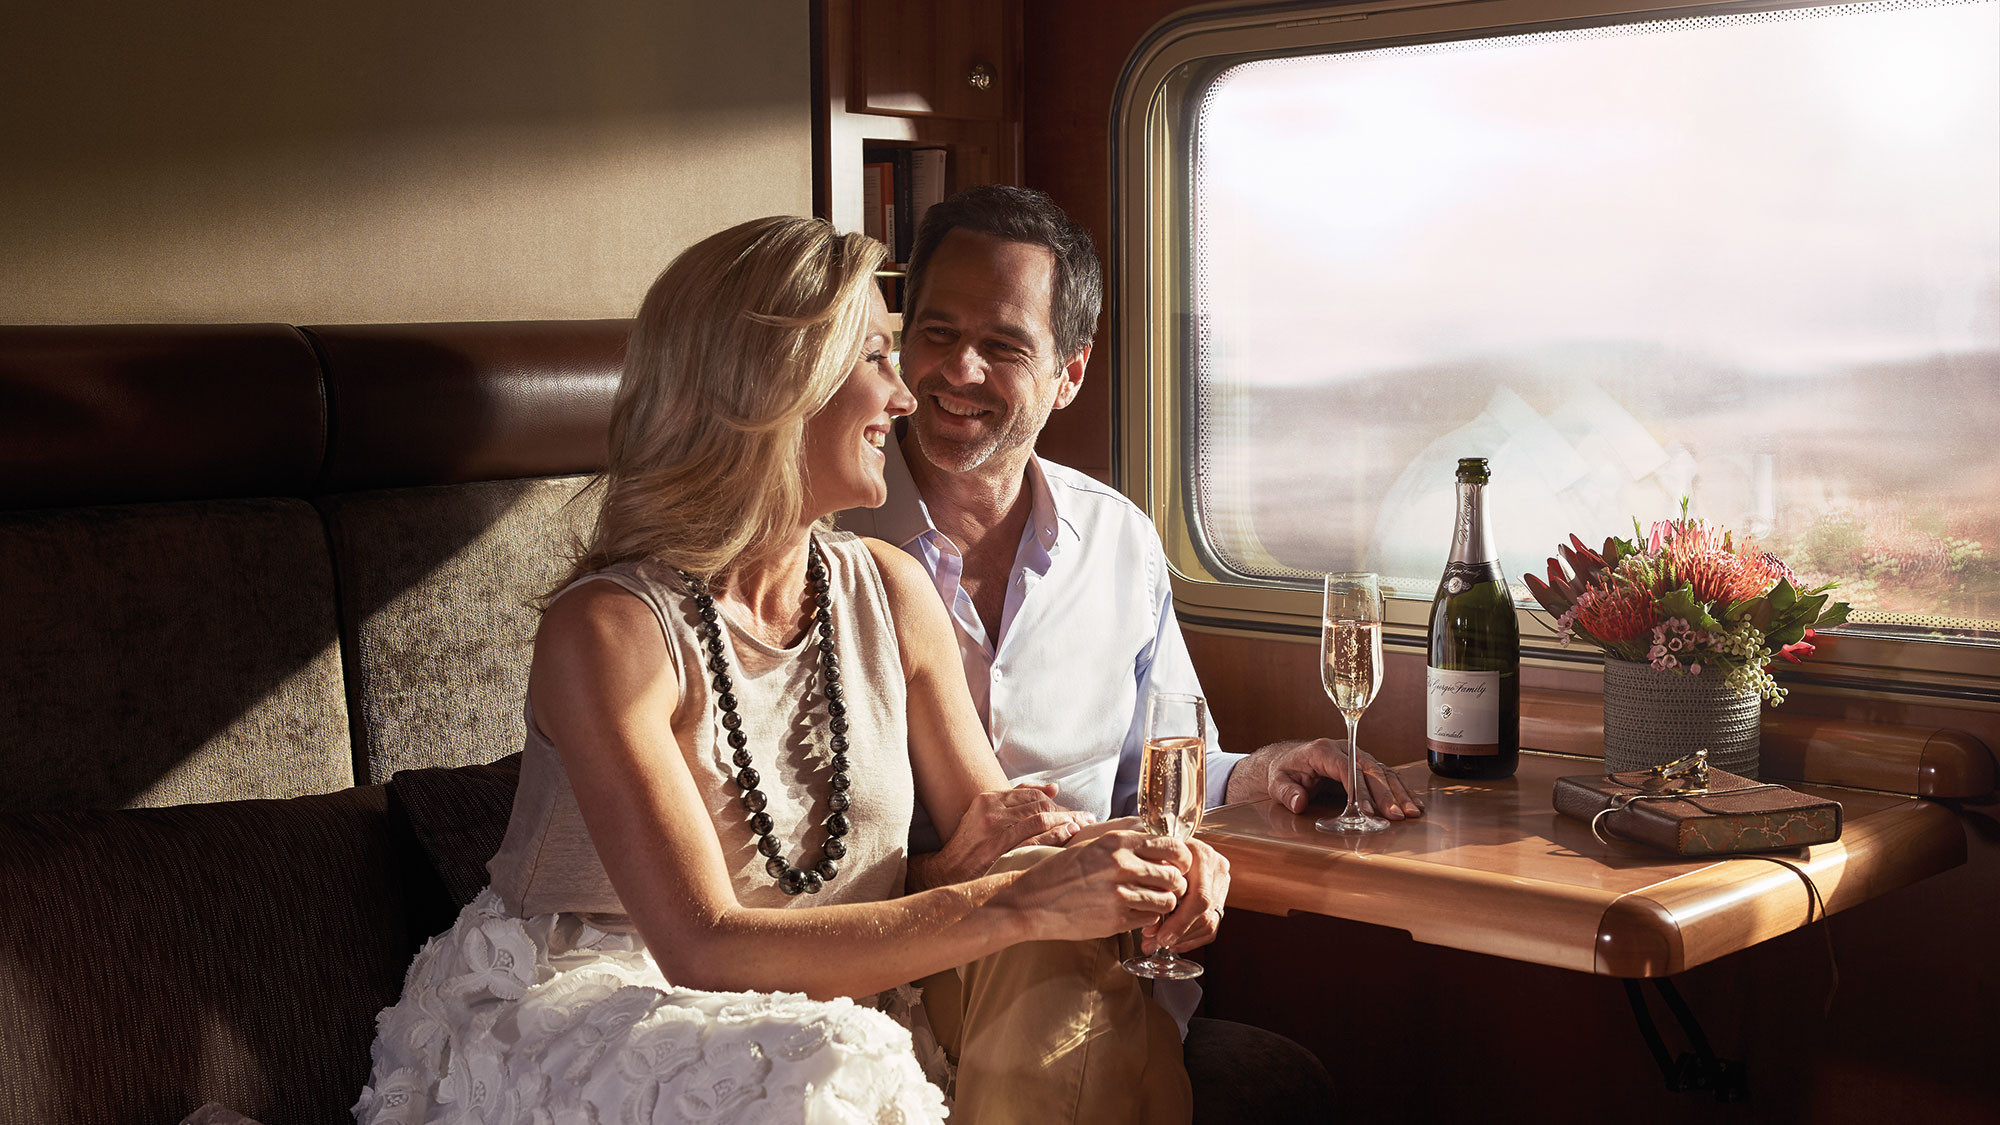 win a trip on the ghan